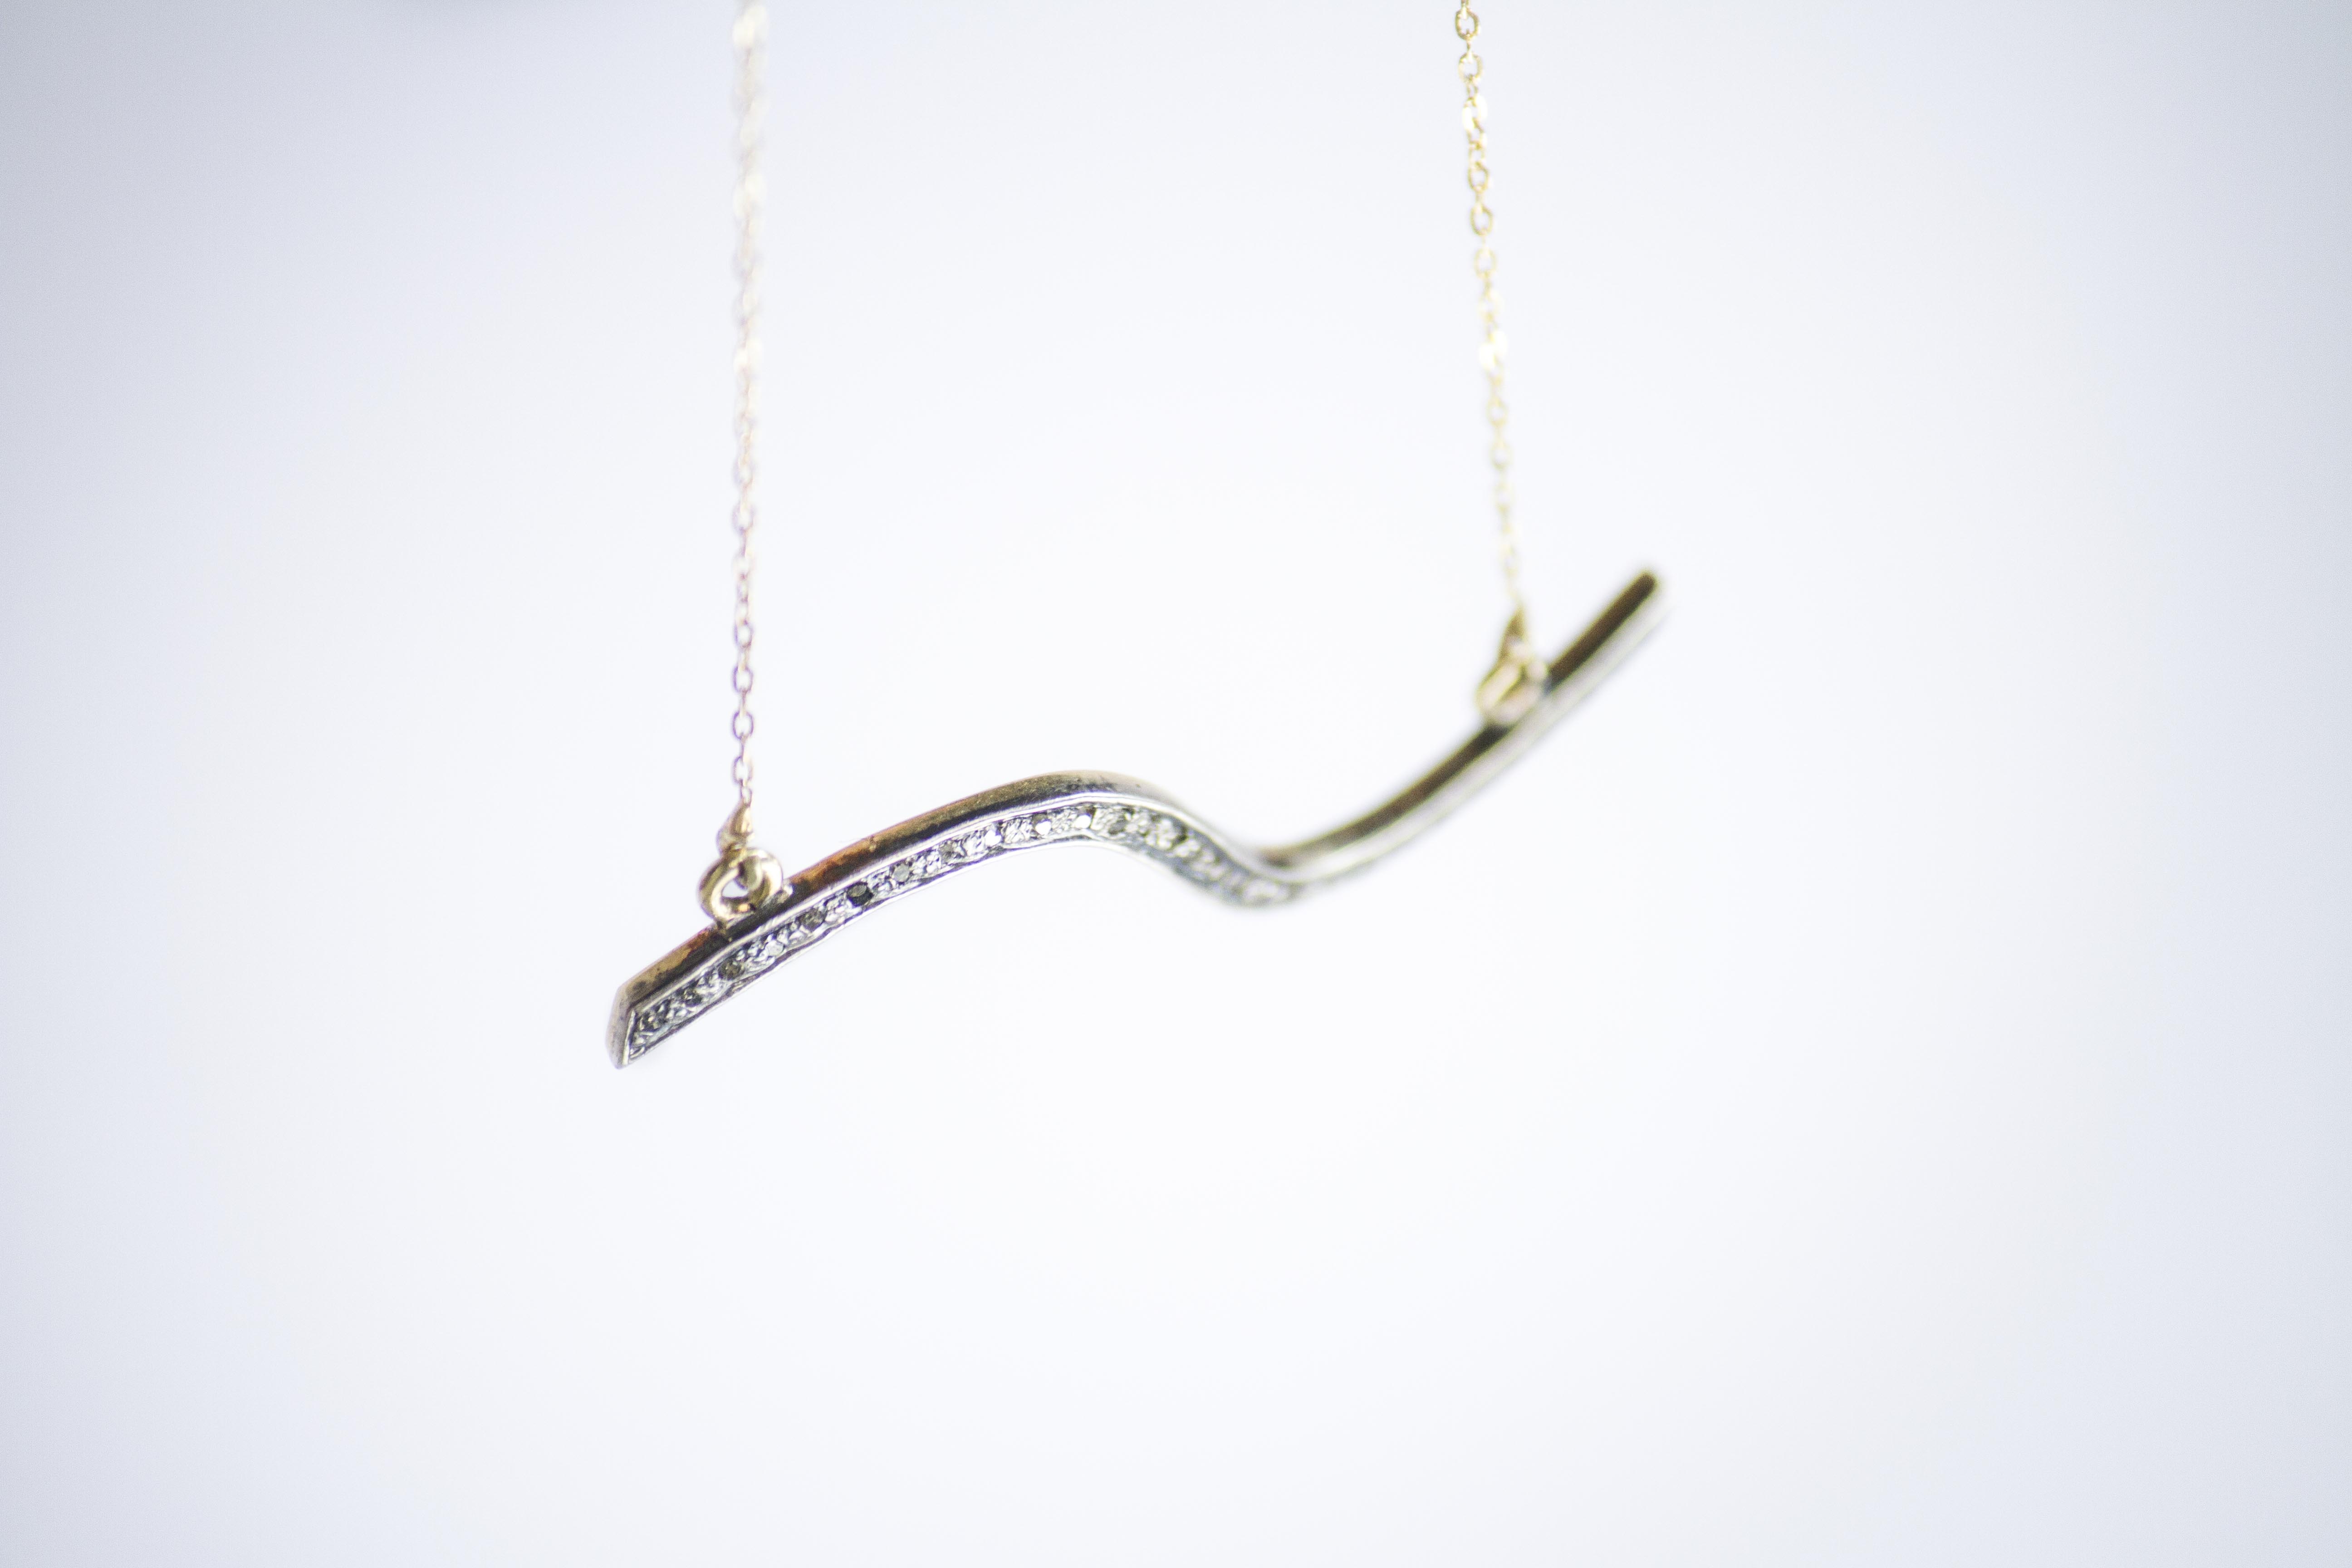 wave necklace Delicate pendant crafted with 14k yellow with diamond pave and a fine chain